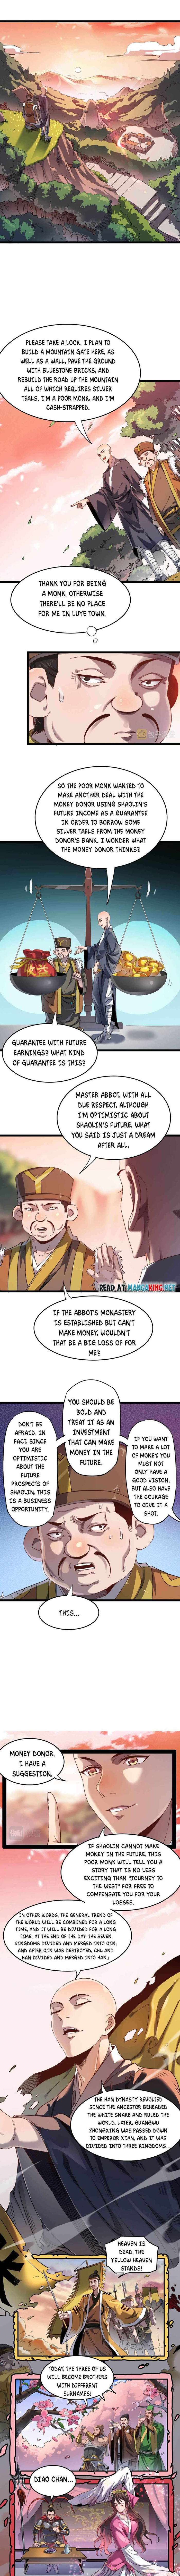 Building The Strongest Shaolin Temple In Another World - Page 3